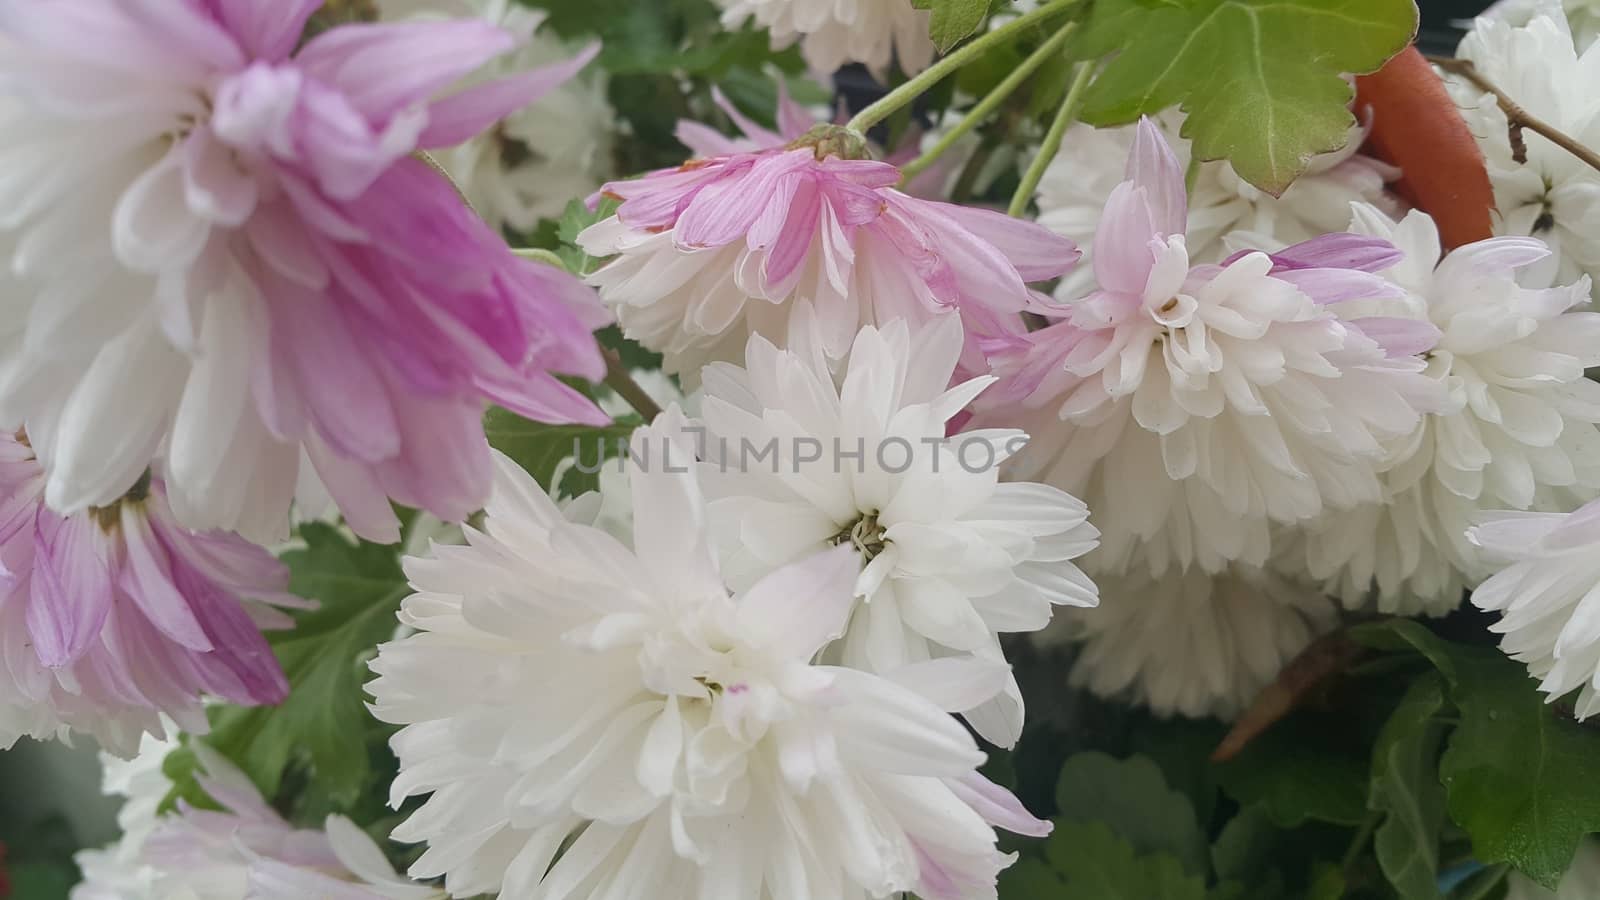 Close up of a lovely fresh white flower with purplish petals and green leaves blurred background. Flower background for text and messages.